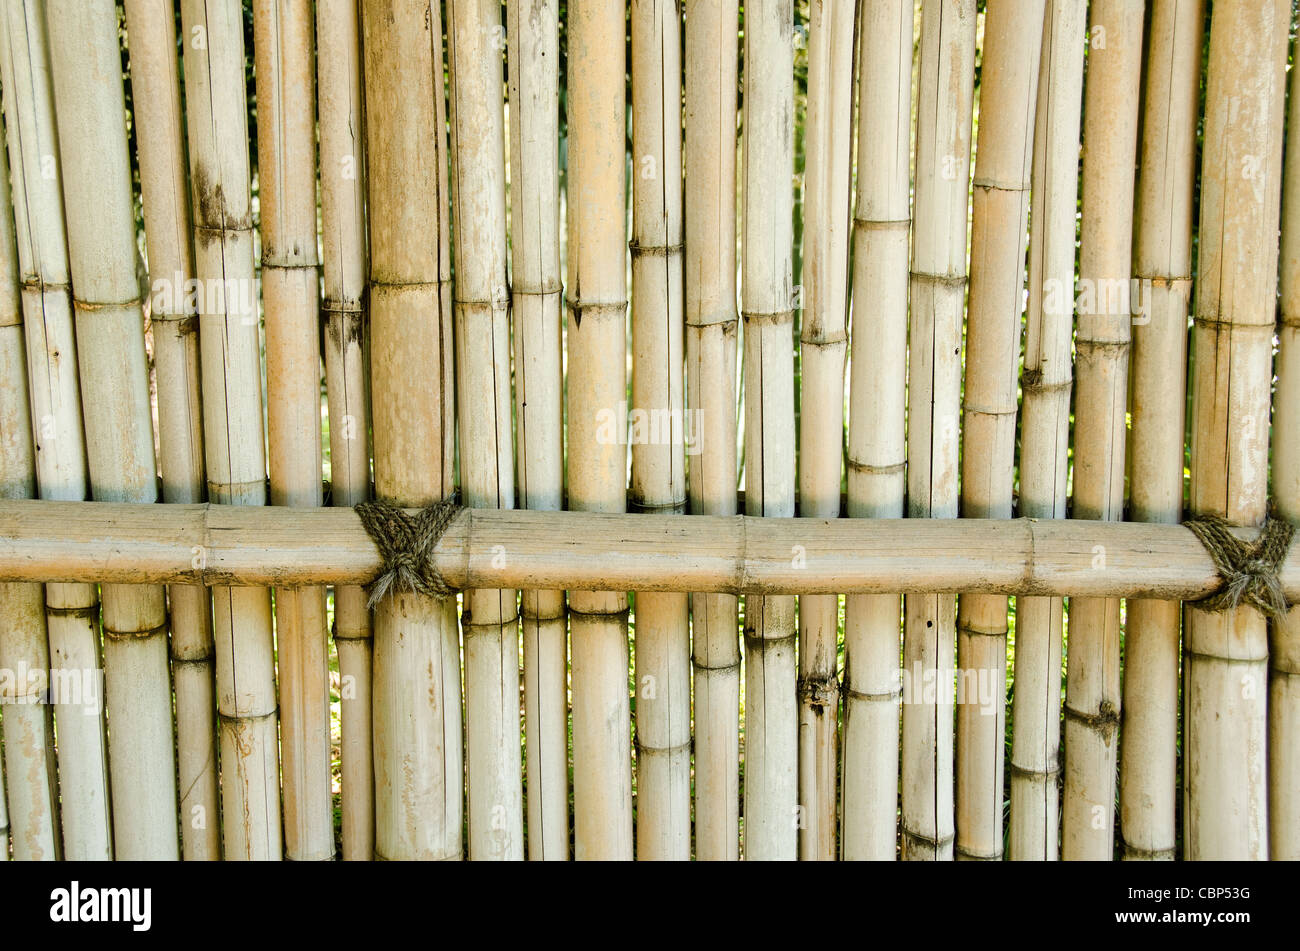 Fence made of bamboo sticks, background natural material Stock Photo